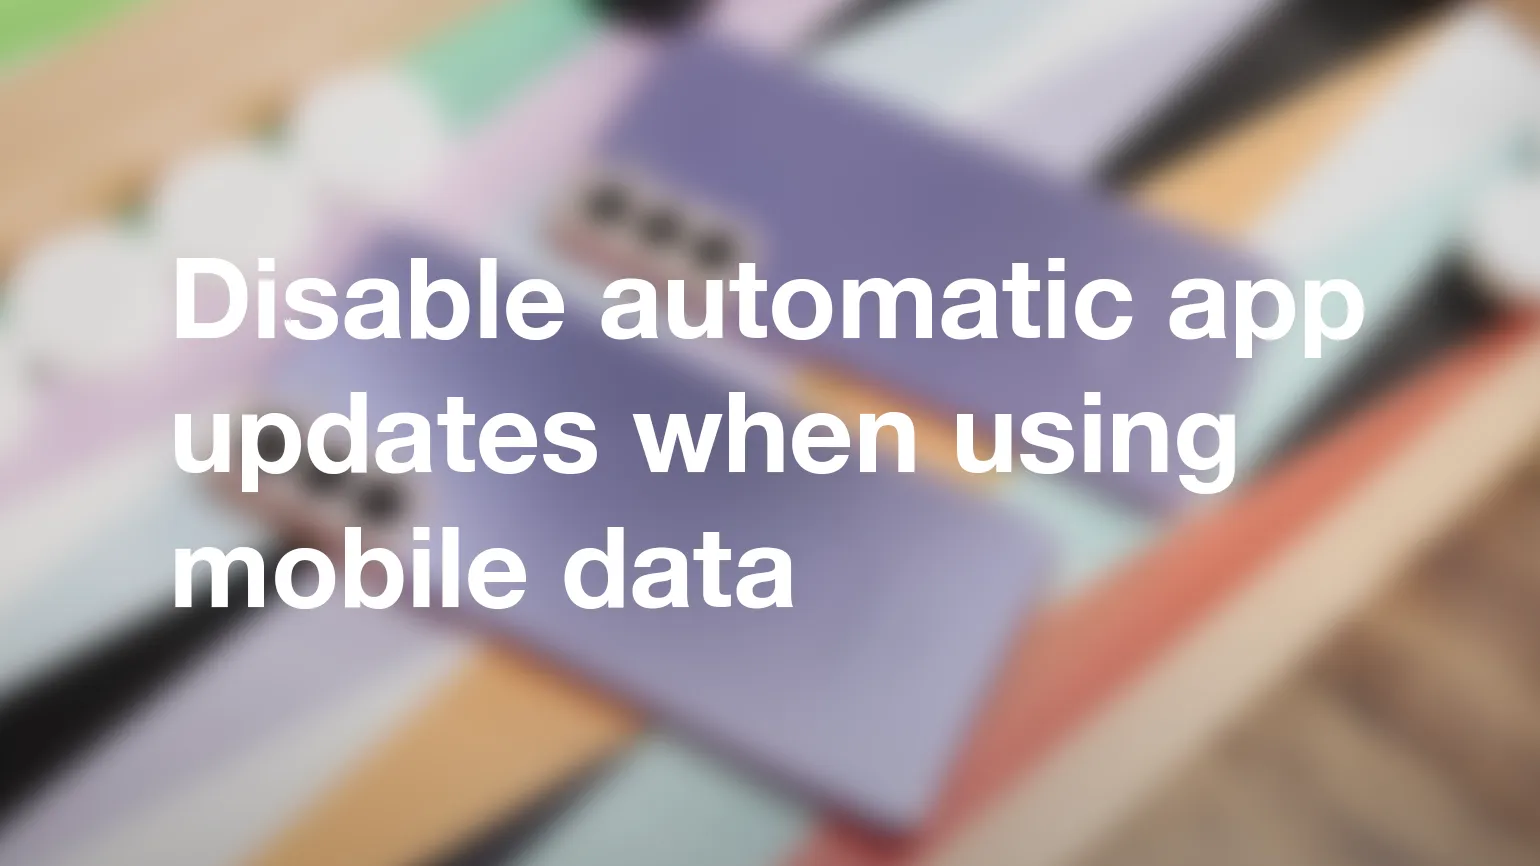 Disable automatic app updates when using mobile data